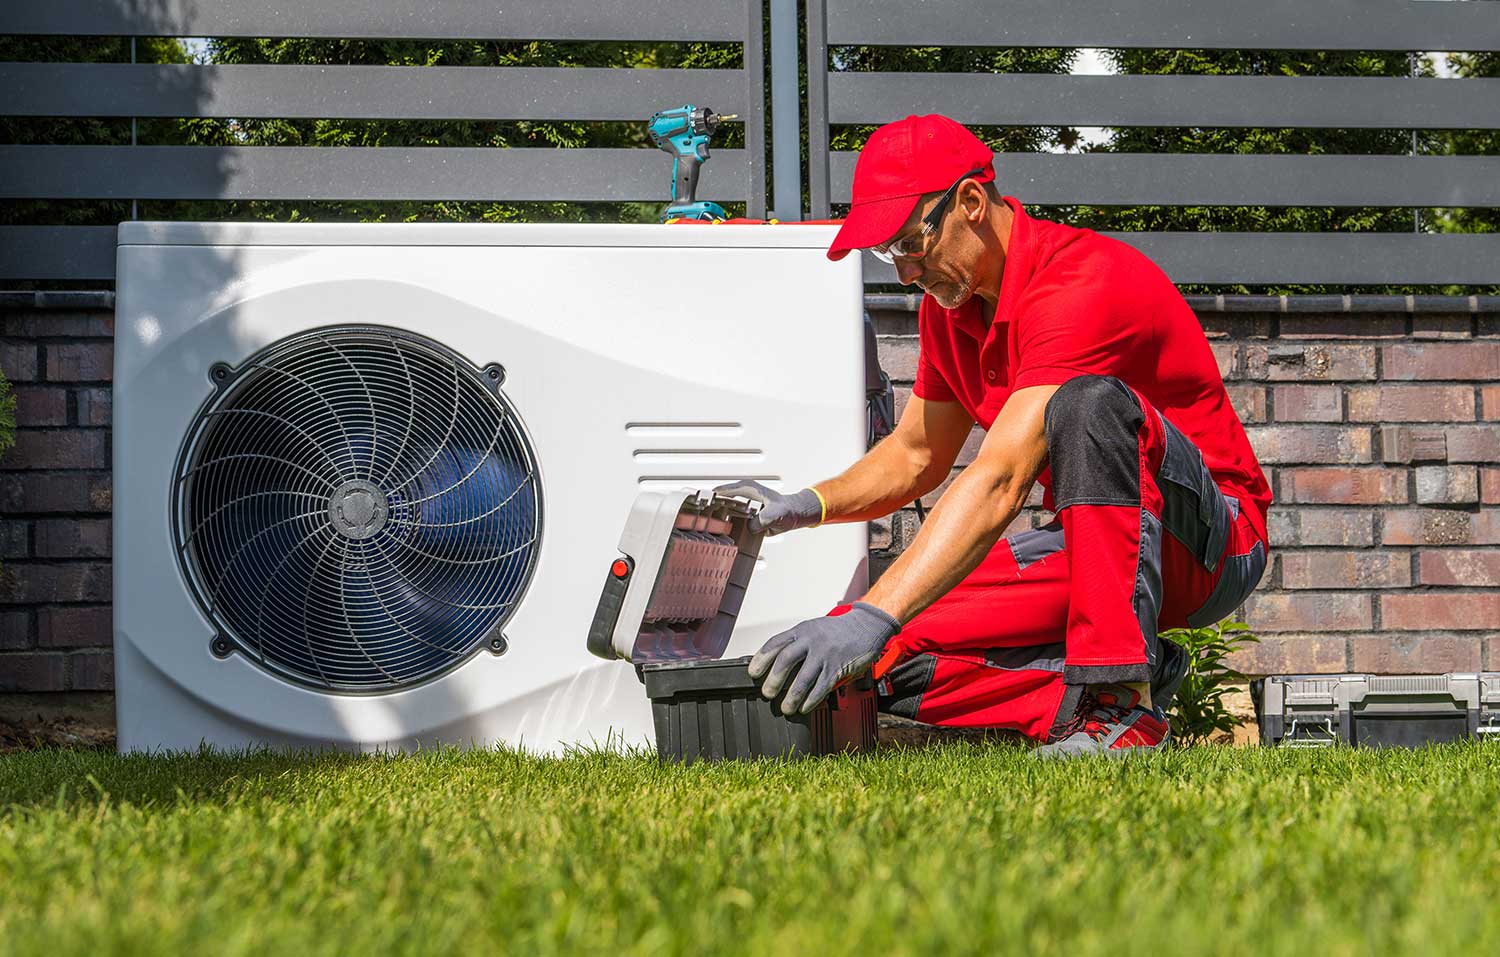 My spouse is an Heating & A/C specialist in Roselle, IL